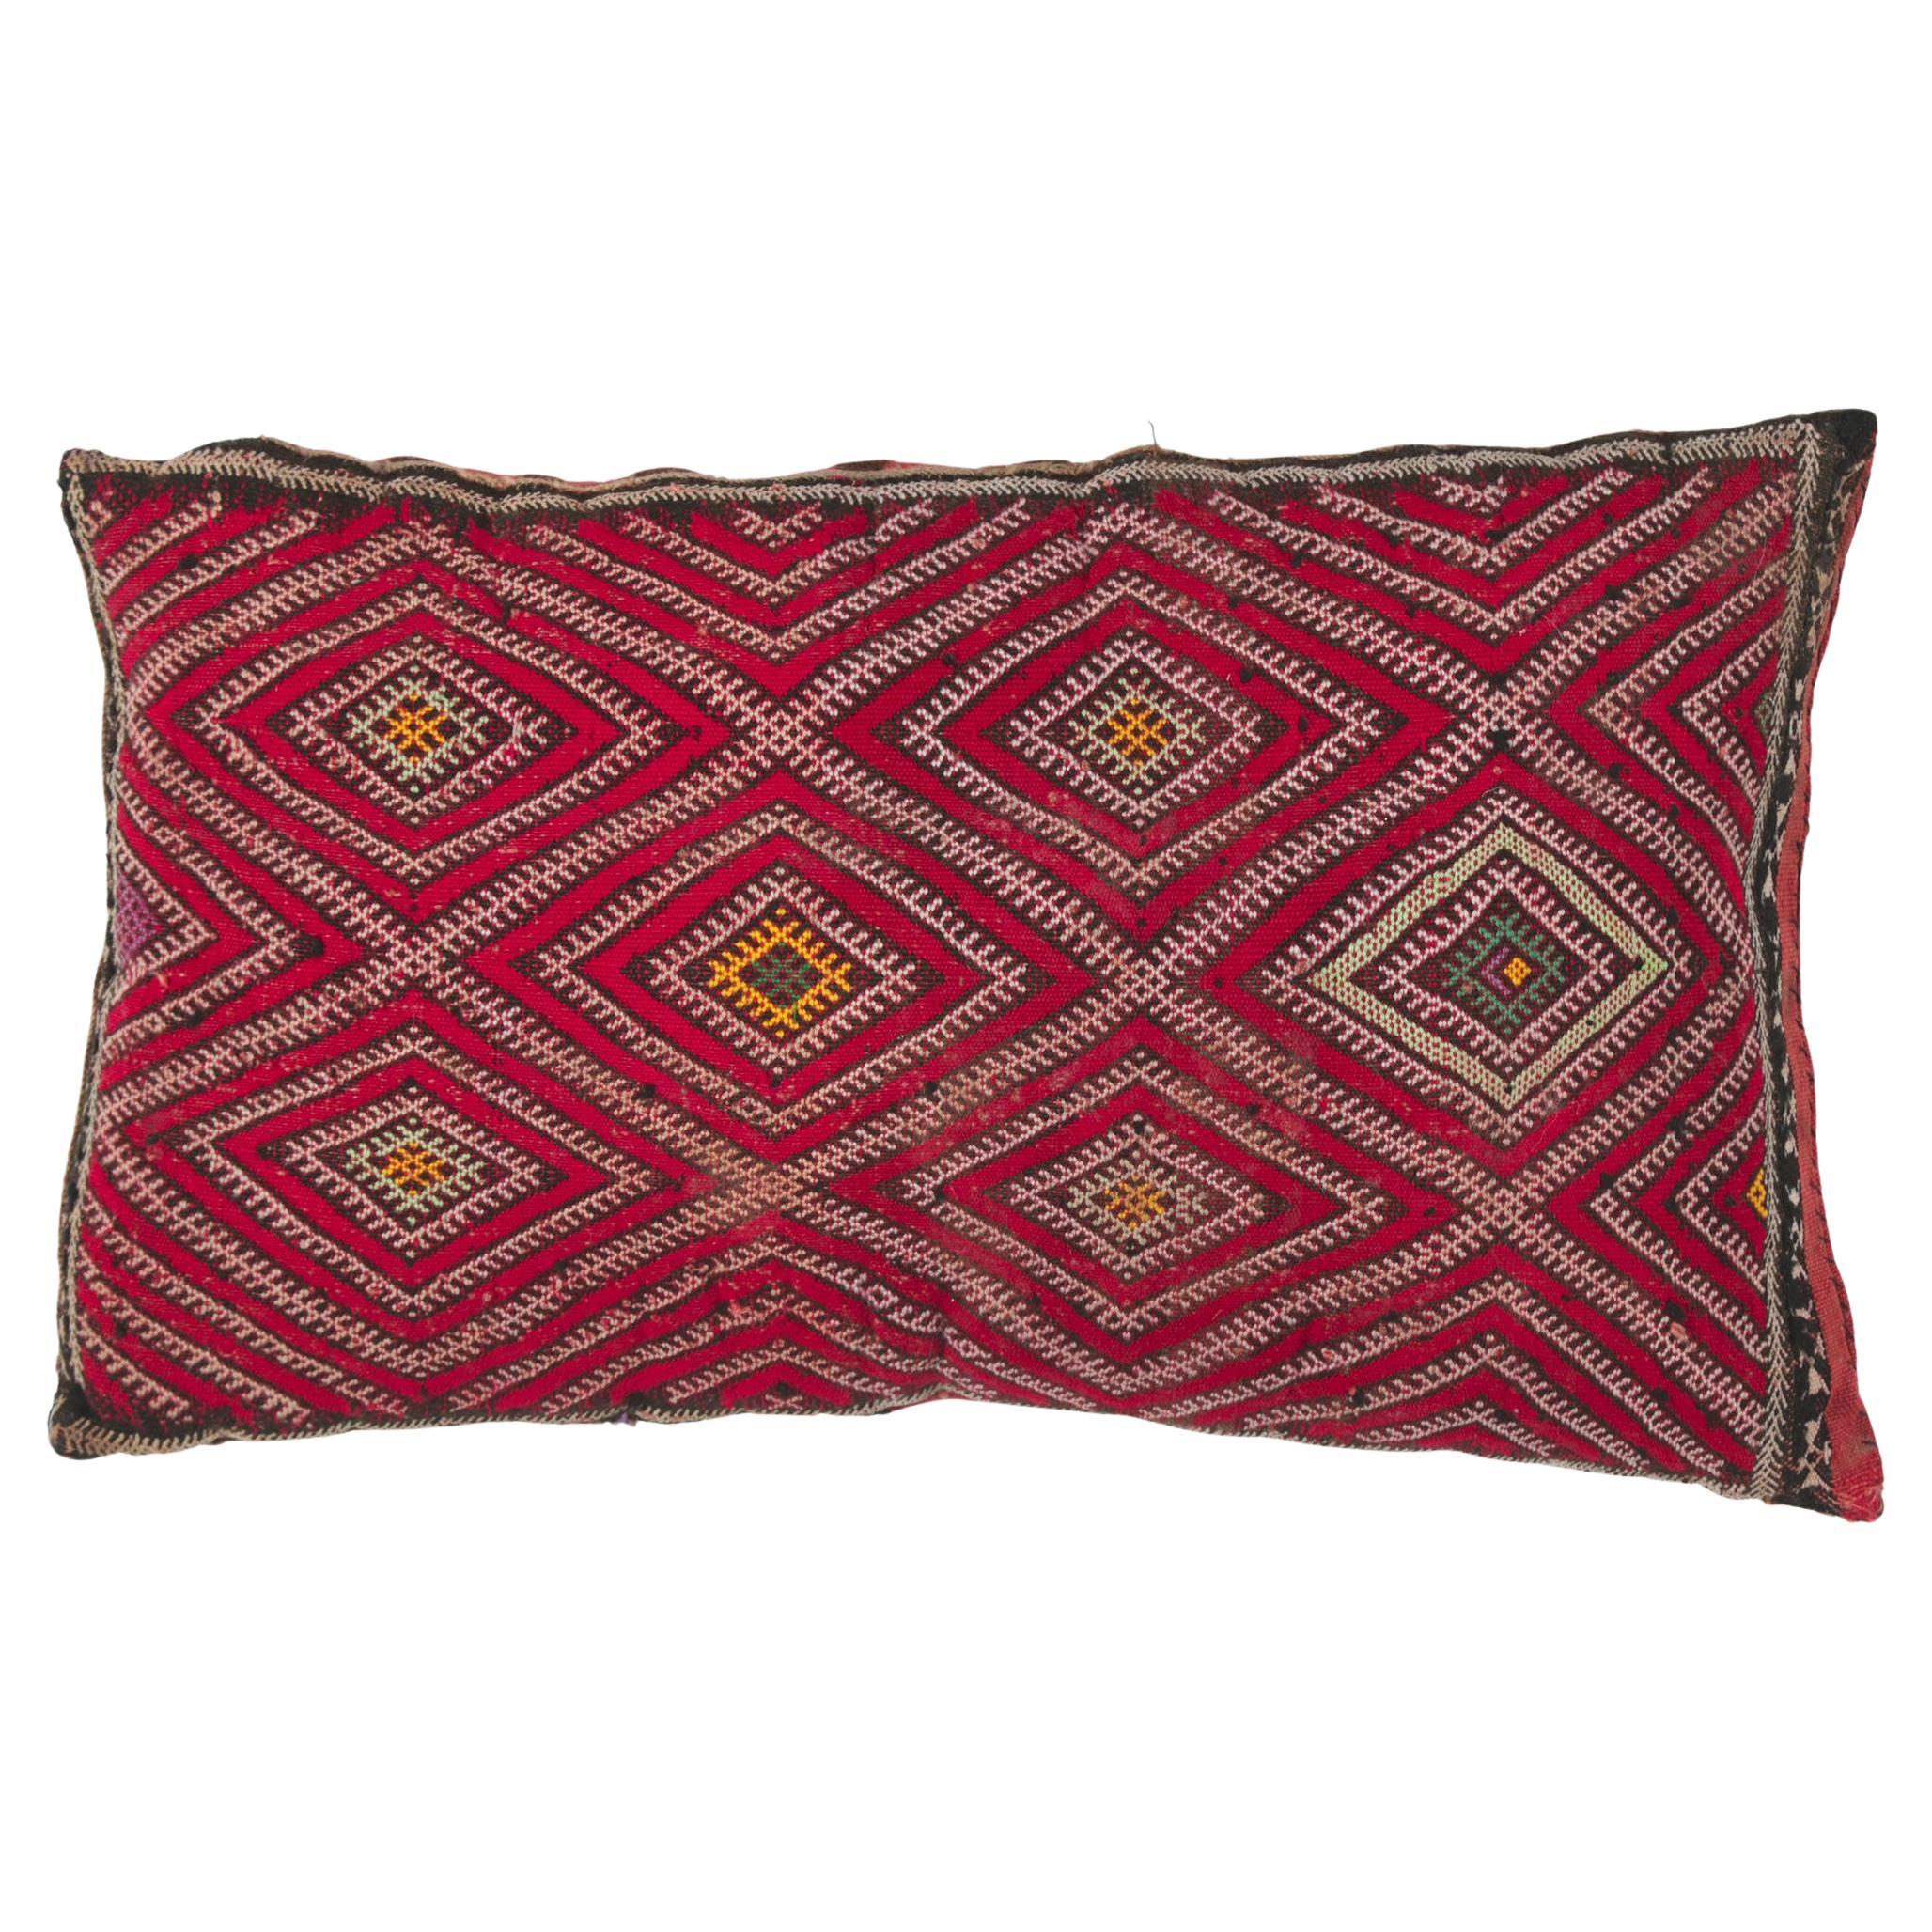 Vintage Zemmour Moroccan Rug Pillow by Berber Tribes of Morocco For Sale